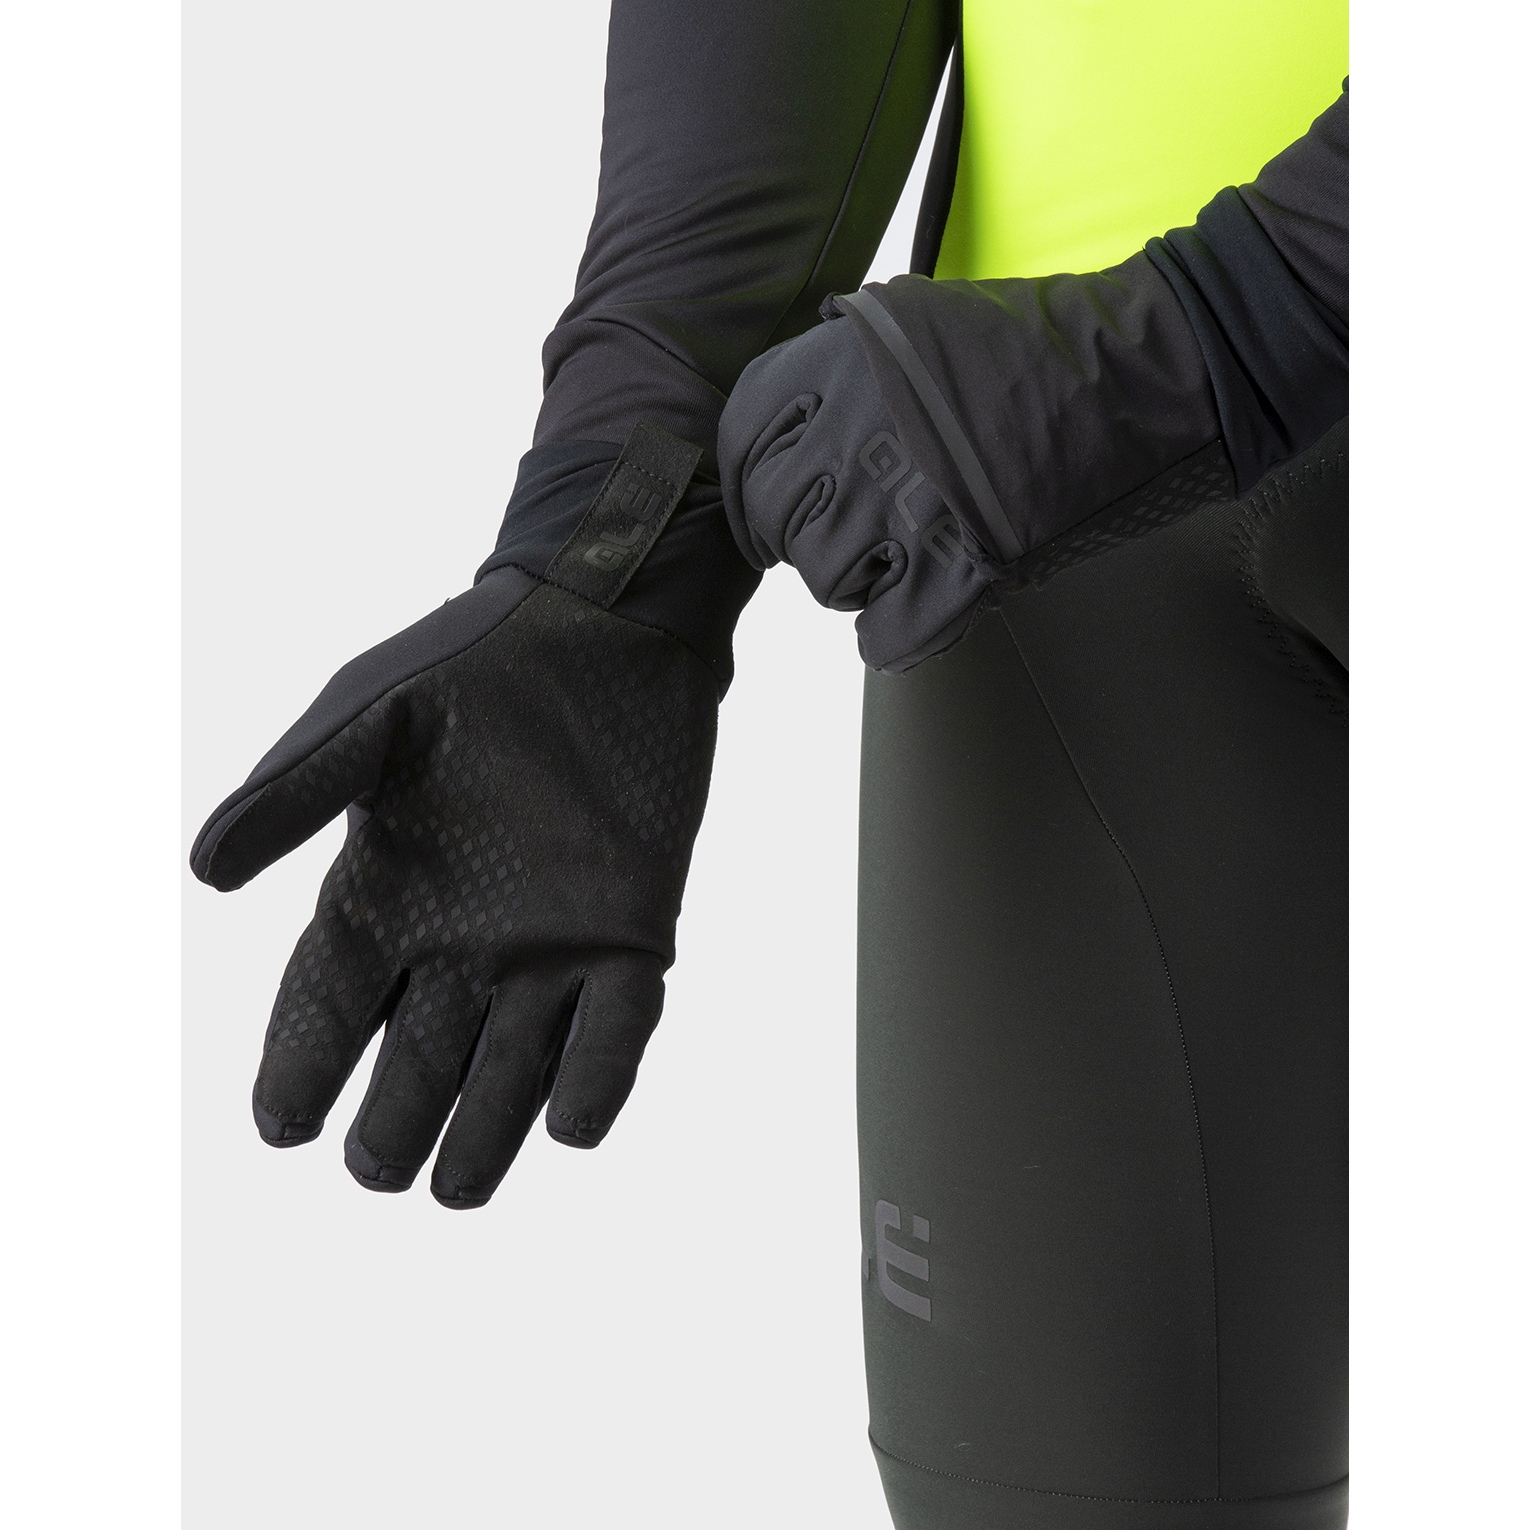 SPECIALIZED gants vélo hiver HyperViz Prime-Series Thermal CYCLES